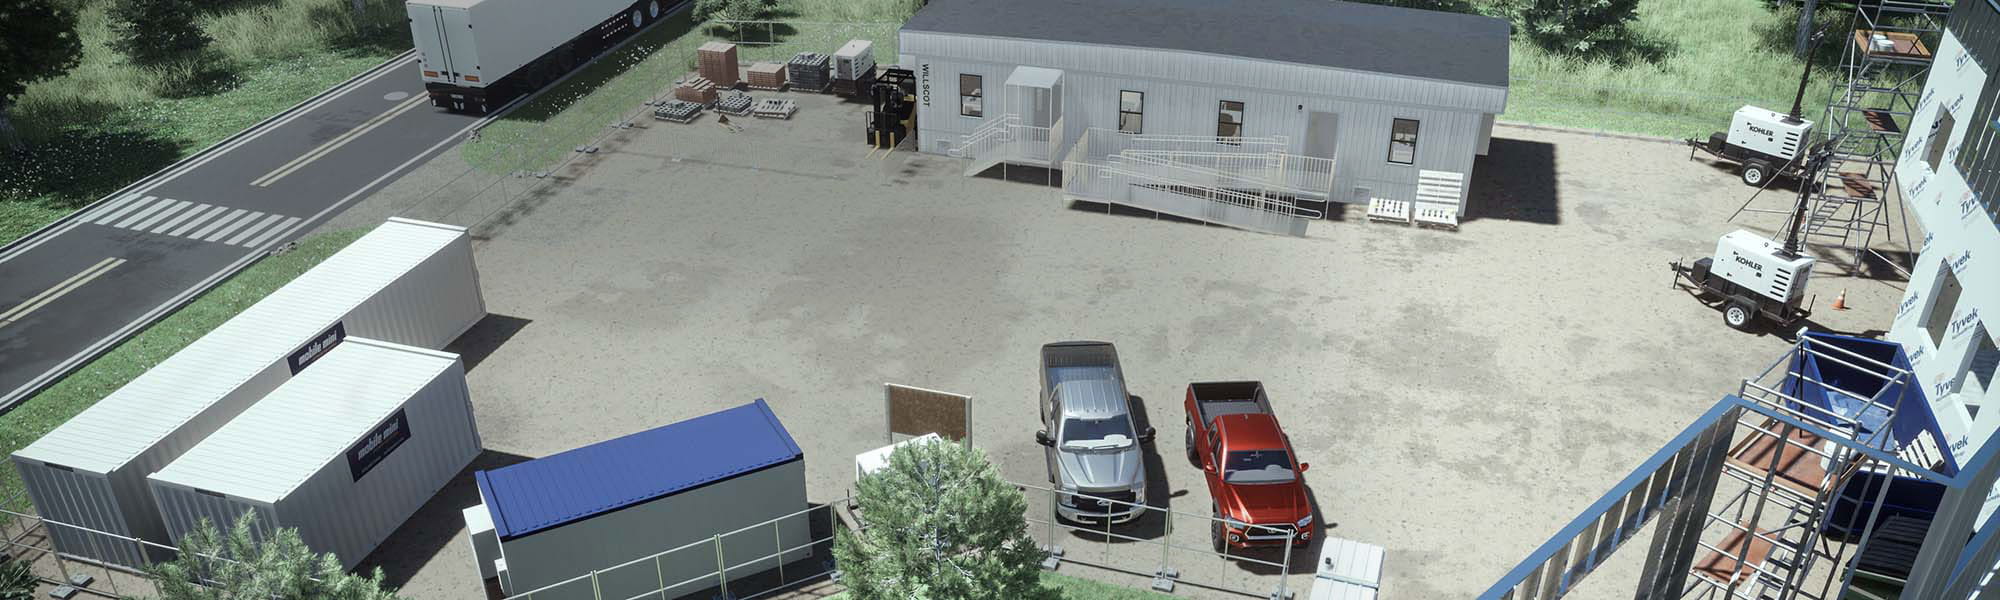 Rendering of  storage containers on a job site